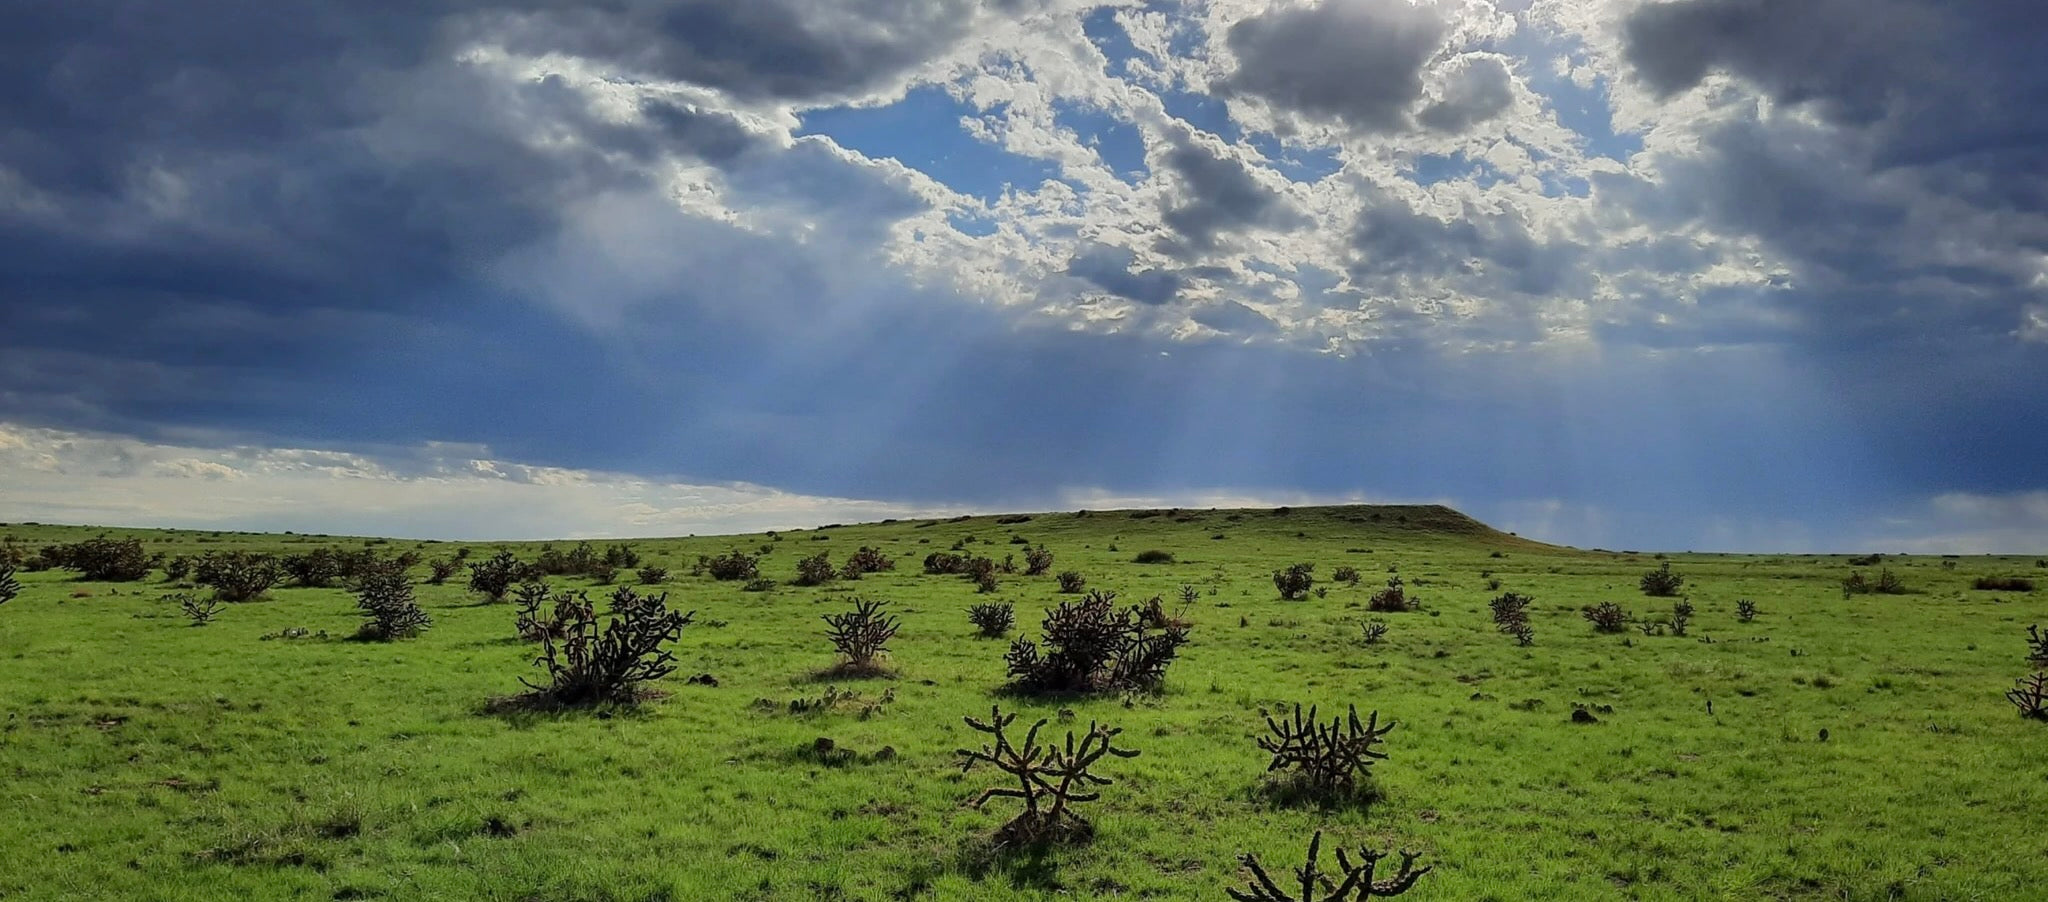 Image of grassland in Bent County, Colorado with sun seeping through clouds.  